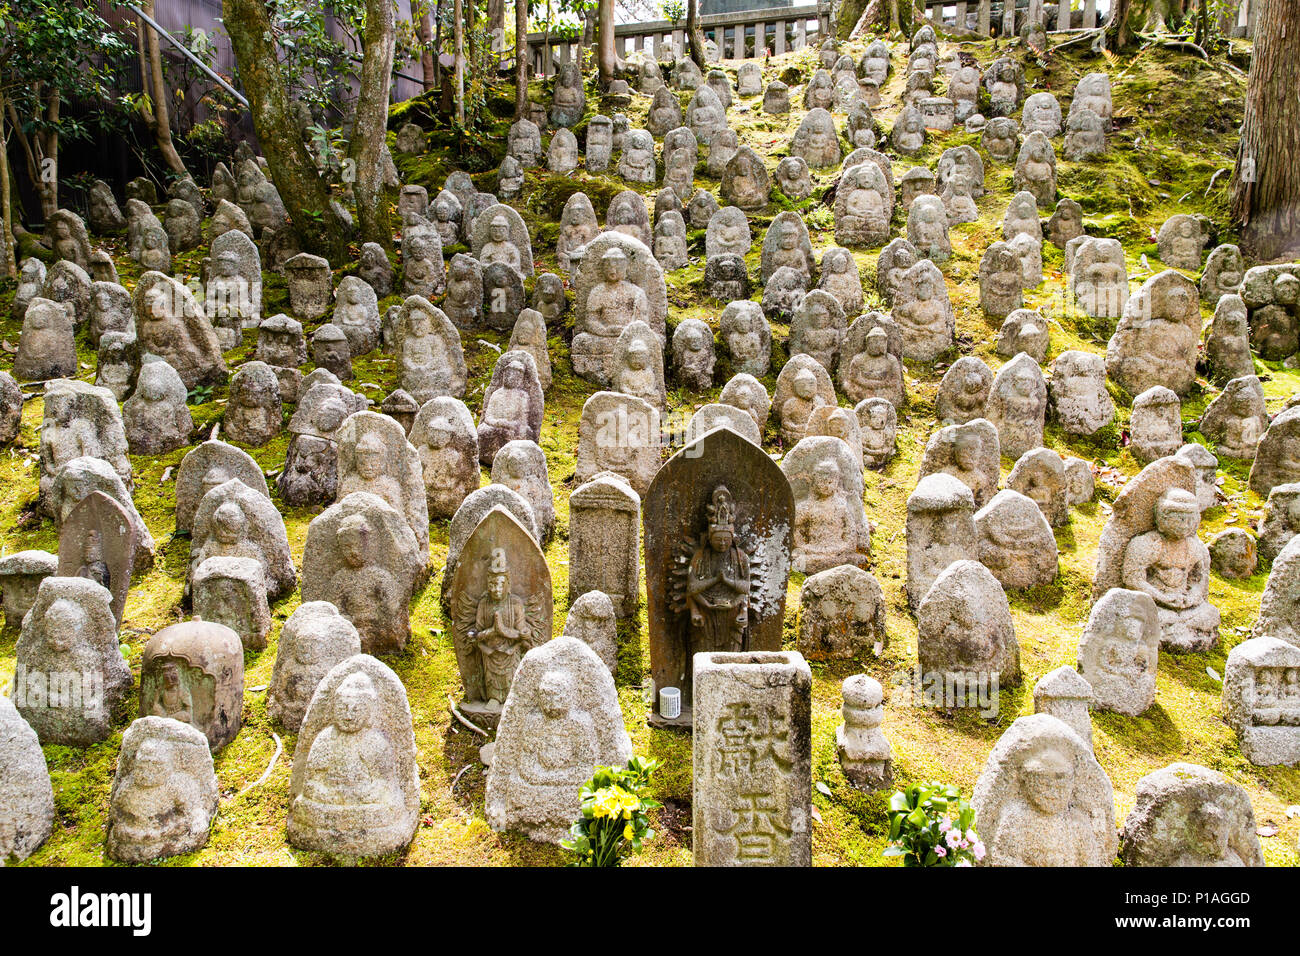 A Large Collection of Small Jizo Statues in the Grounds of Kiyomizu-dera Temple, Kyoto, Japan. Stock Photo